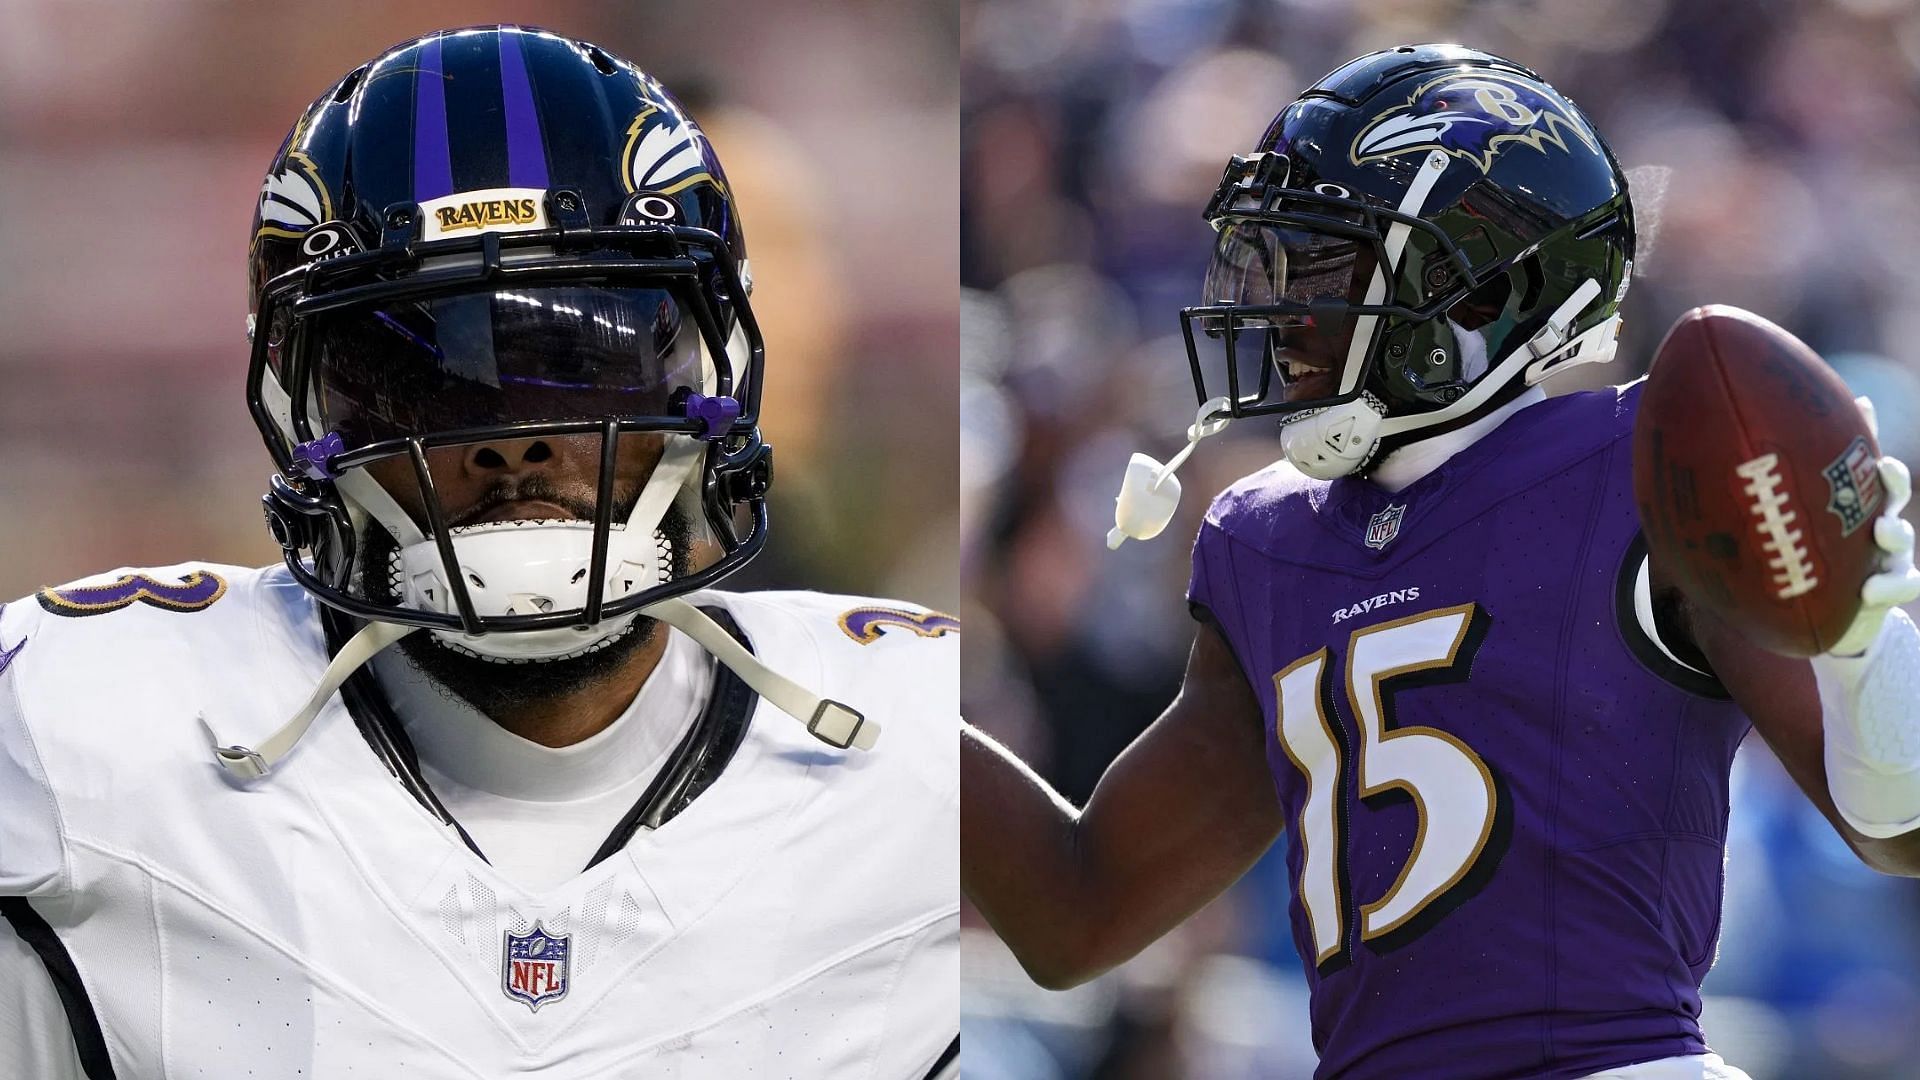 Odell Beckham Jr. and Nelson Agholor may be leaving the Ravens soon